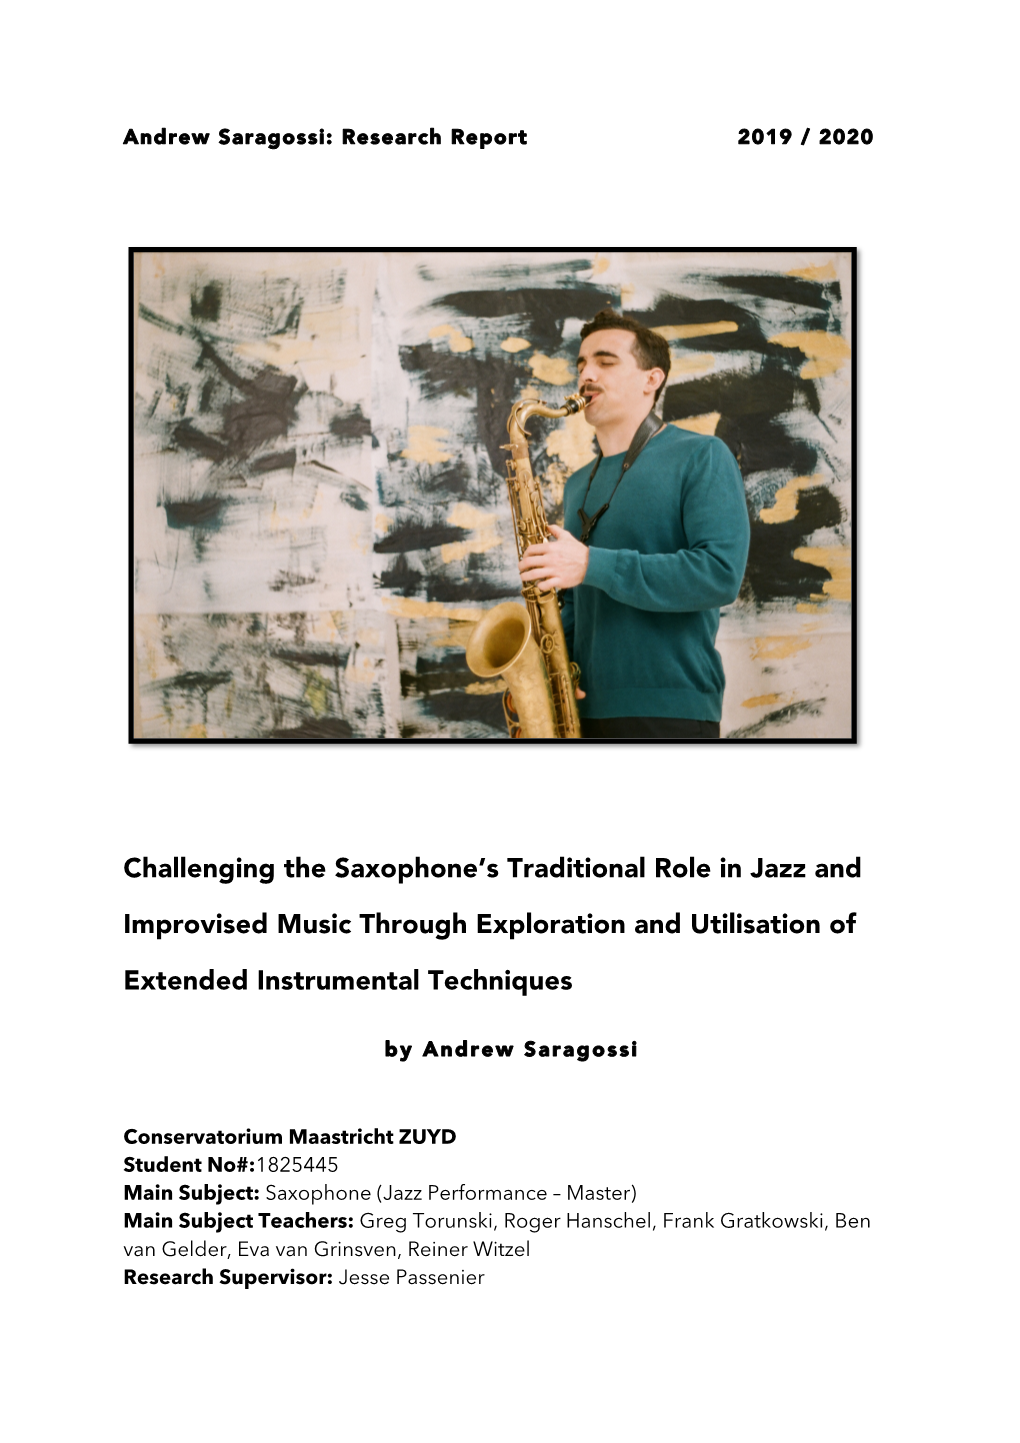 Challenging the Saxophone's Traditional Role in Jazz And